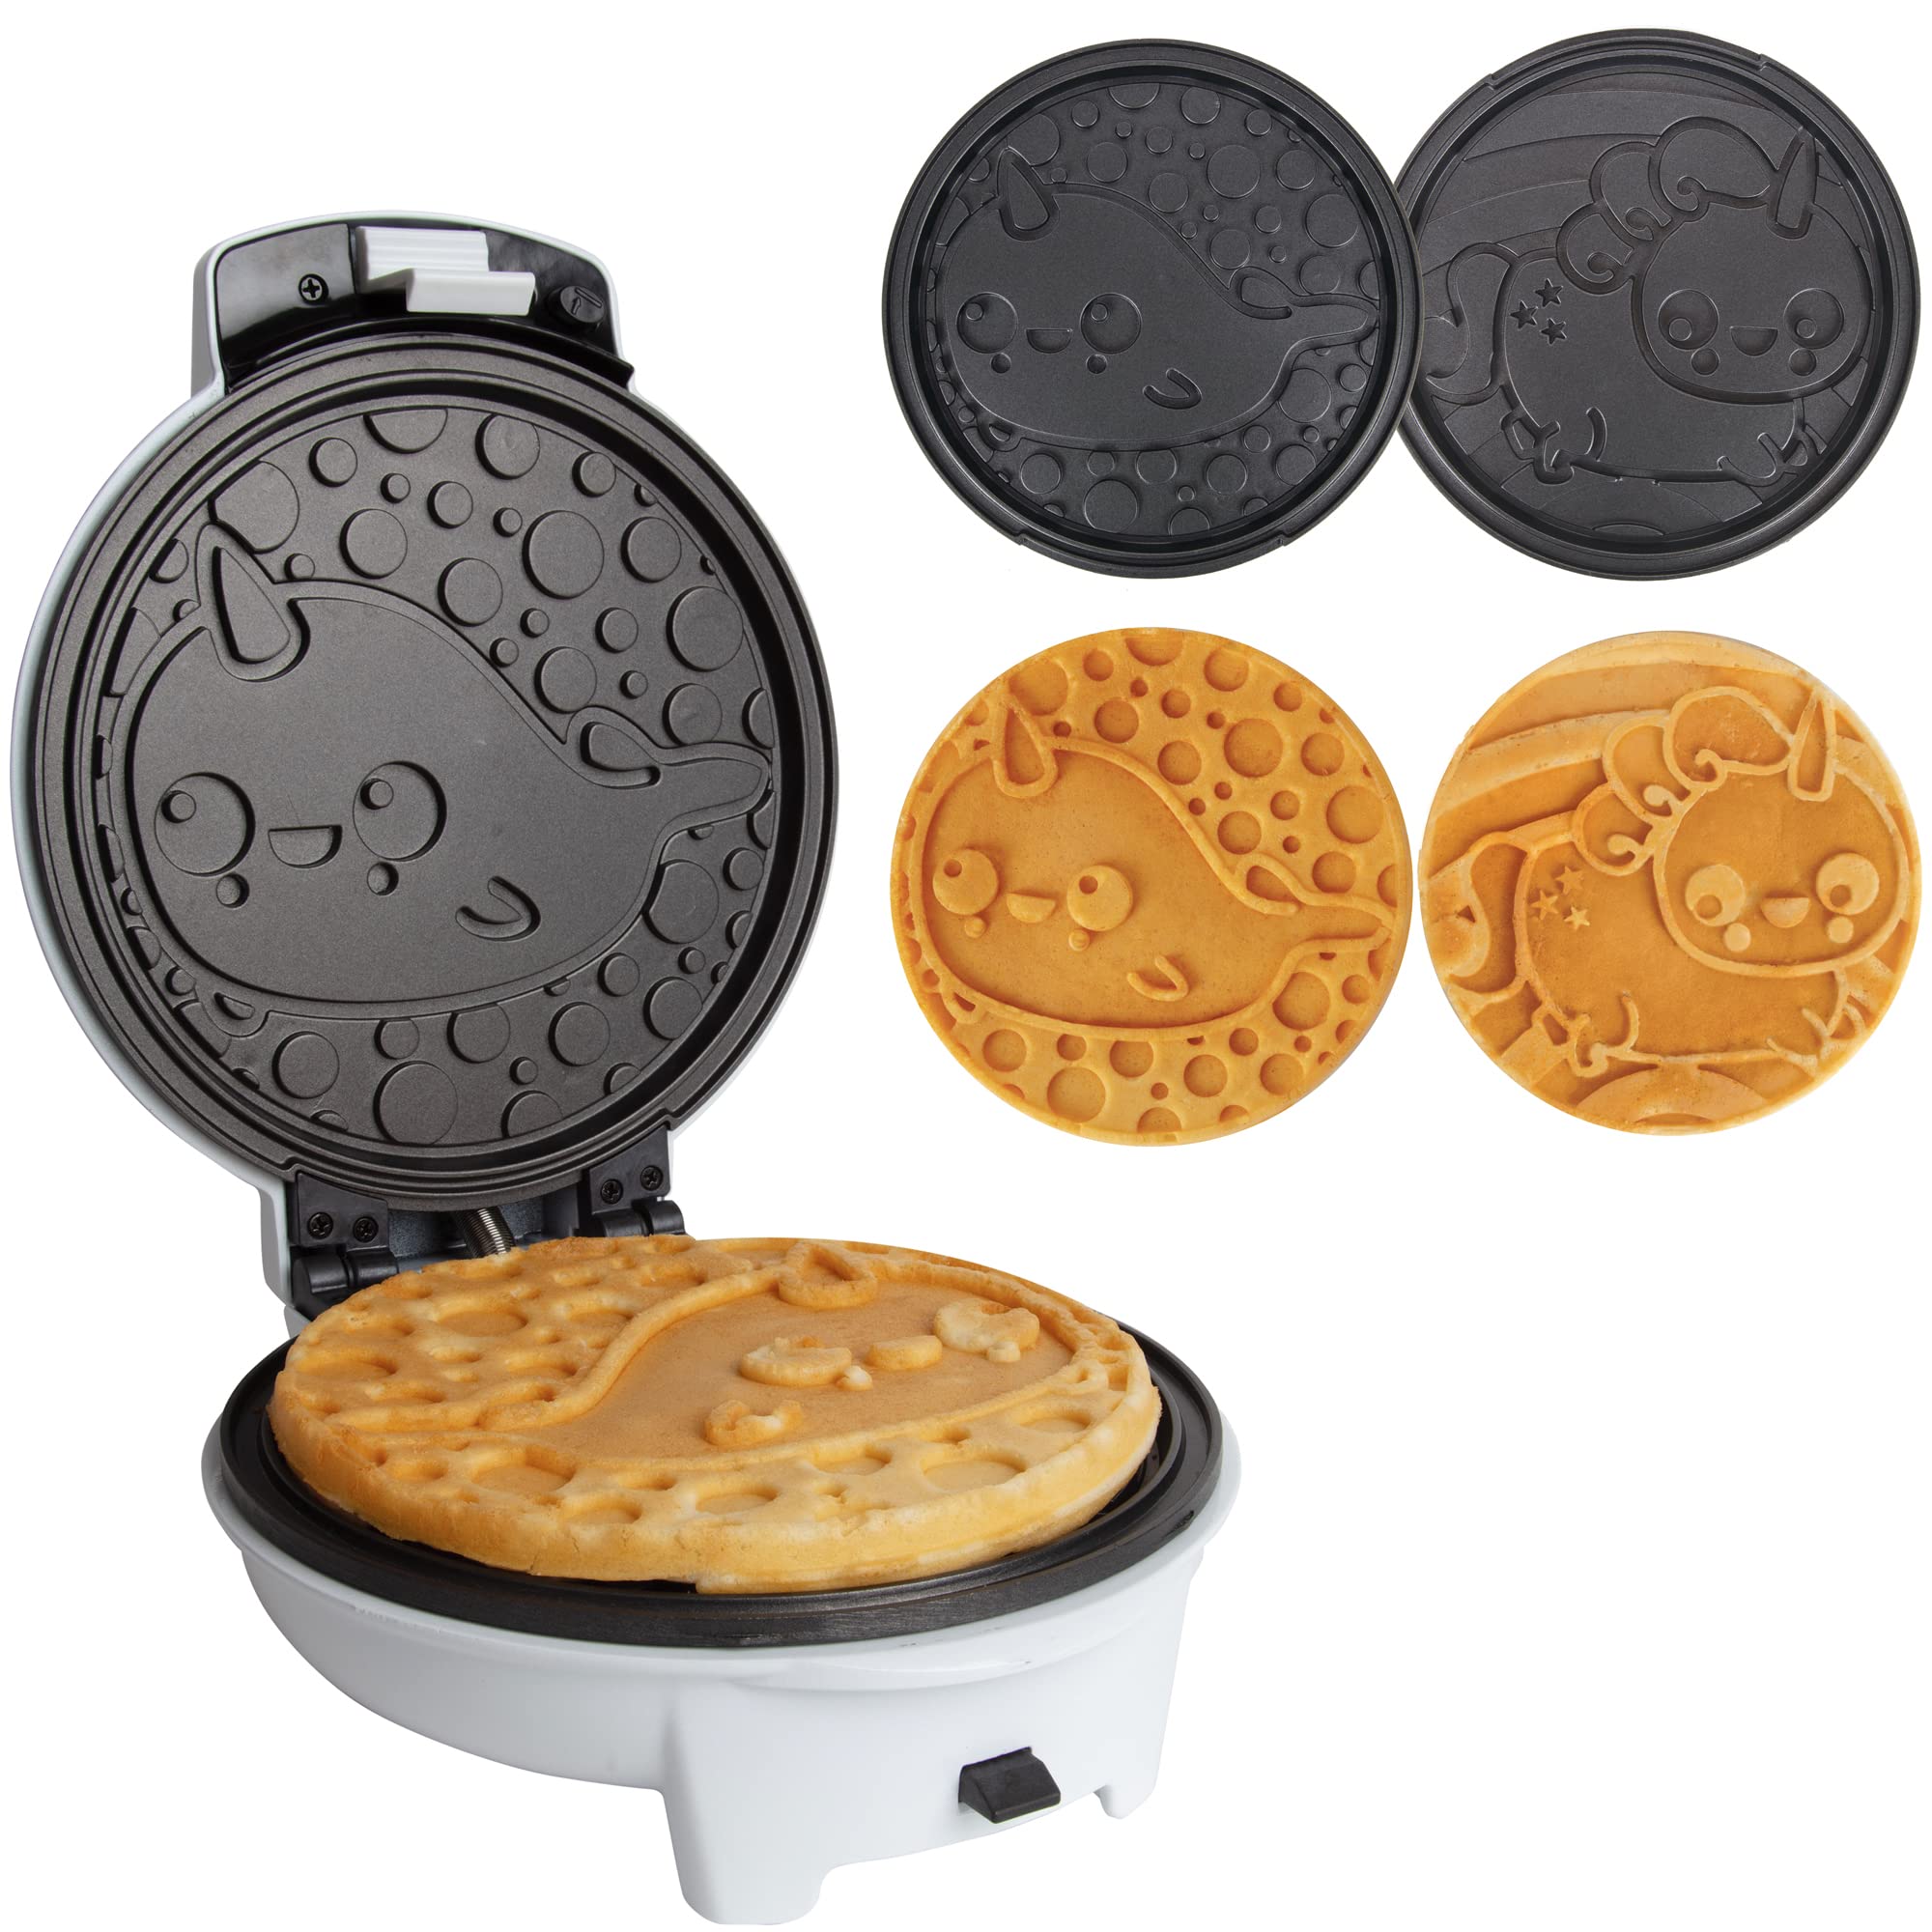 Narwhal Electric Waffle Maker w Removable Unicorn Plate for Easy Cleanup- Makes 8" Waffles or Pancakes that Bring Kids Breakfast Smiles- Non-Stick Waffler Griddle, Adjustable Temp Control, Girls Gift